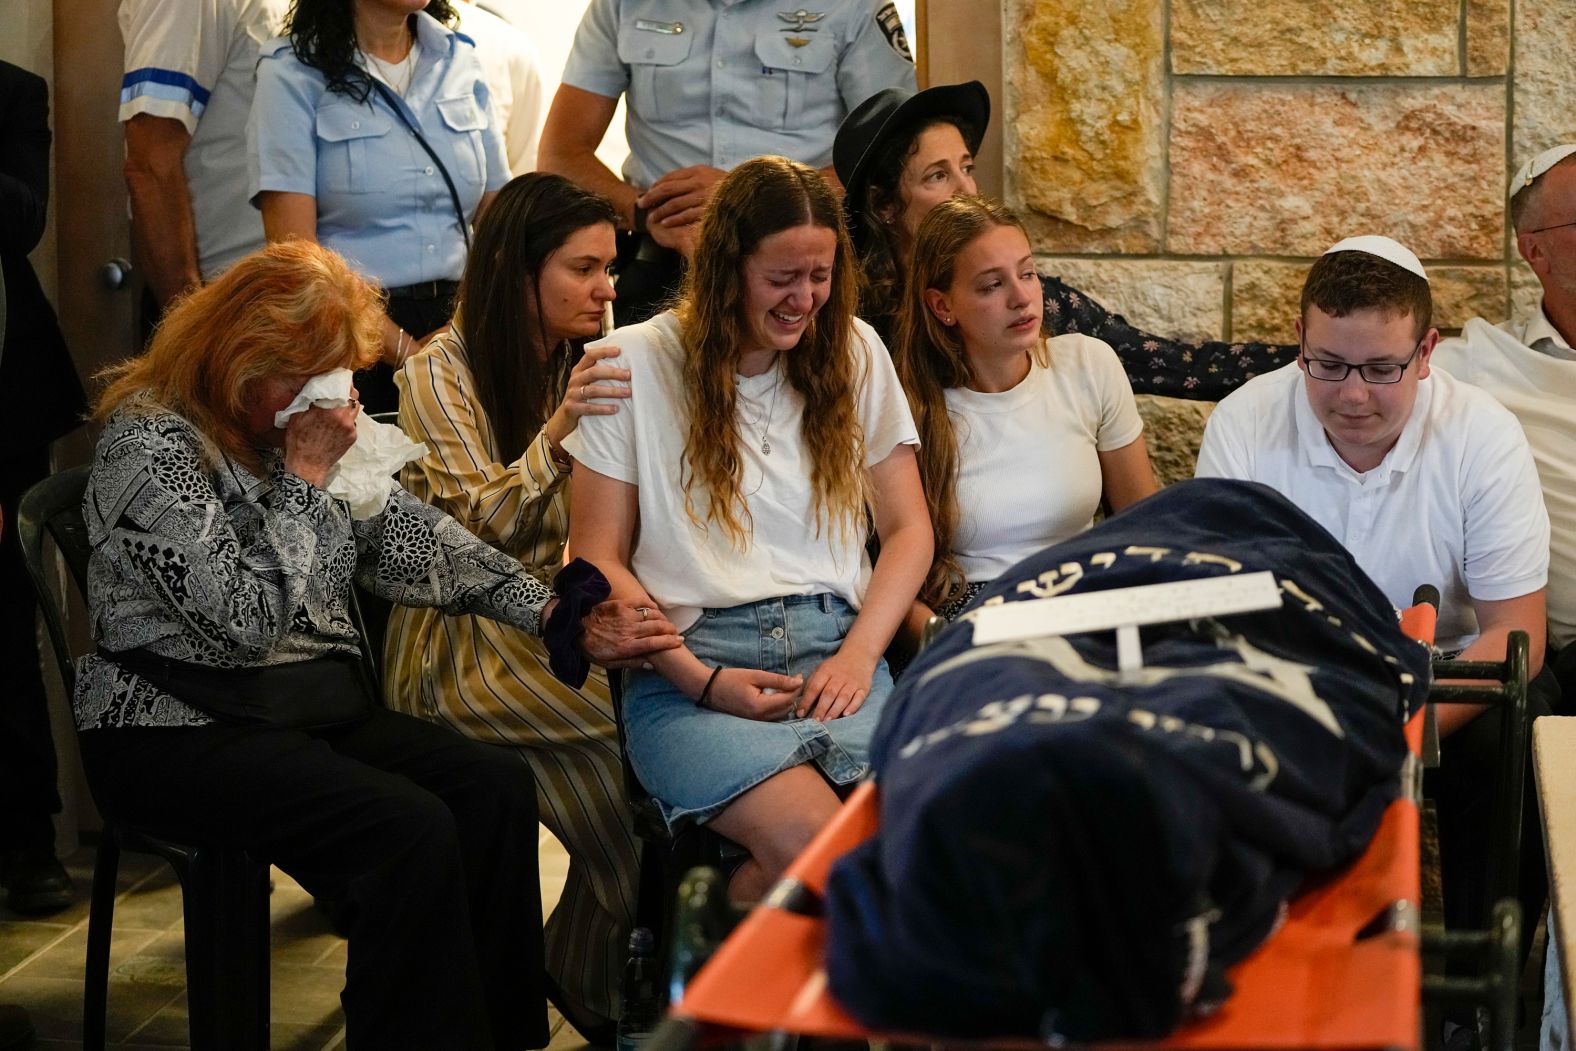 Relatives mourn Maia and Rina Dee at their funeral in Kfar Etzion, West Bank, on Sunday, April 9. The British-Israeli sisters, aged 15 and 20, were <a href="https://www.cnn.com/2023/04/10/middleeast/palestinian-teenager-israel-west-bank-intl/index.html" target="_blank">killed in a shooting</a> alongside their mother that Israeli Prime Minister Benjamin Netanyahu condemned as a "severe terrorist attack." Tensions in Israel and the West Bank spiraled in the aftermath of Israeli police raids on the al-Aqsa mosque in Jerusalem.